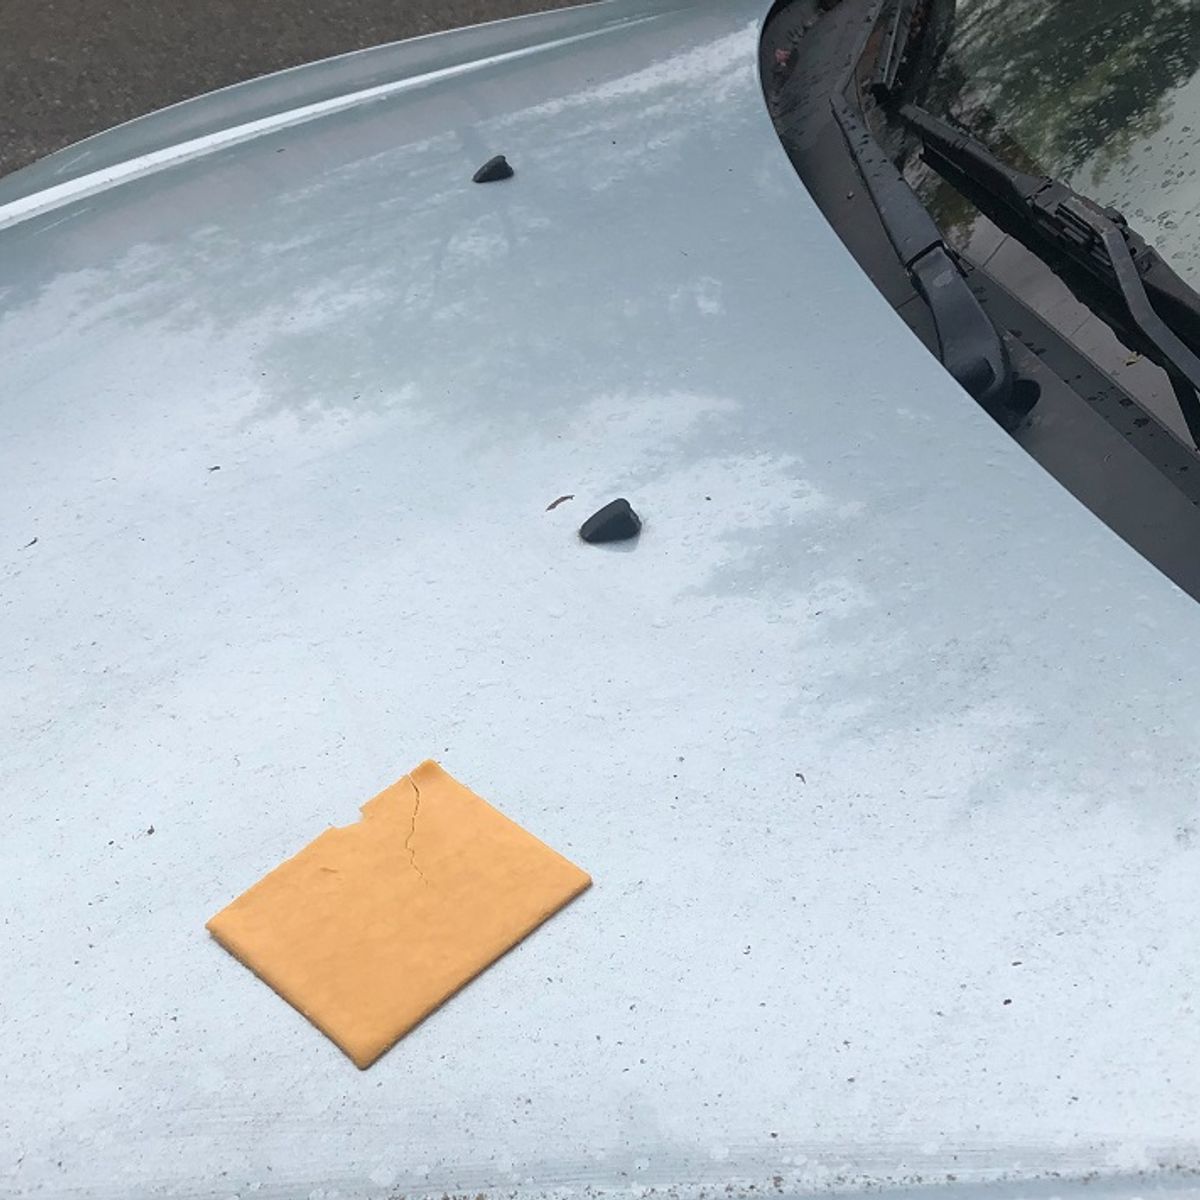 Does Finding Cheese Your Car Hood Mean You Are in | Snopes.com